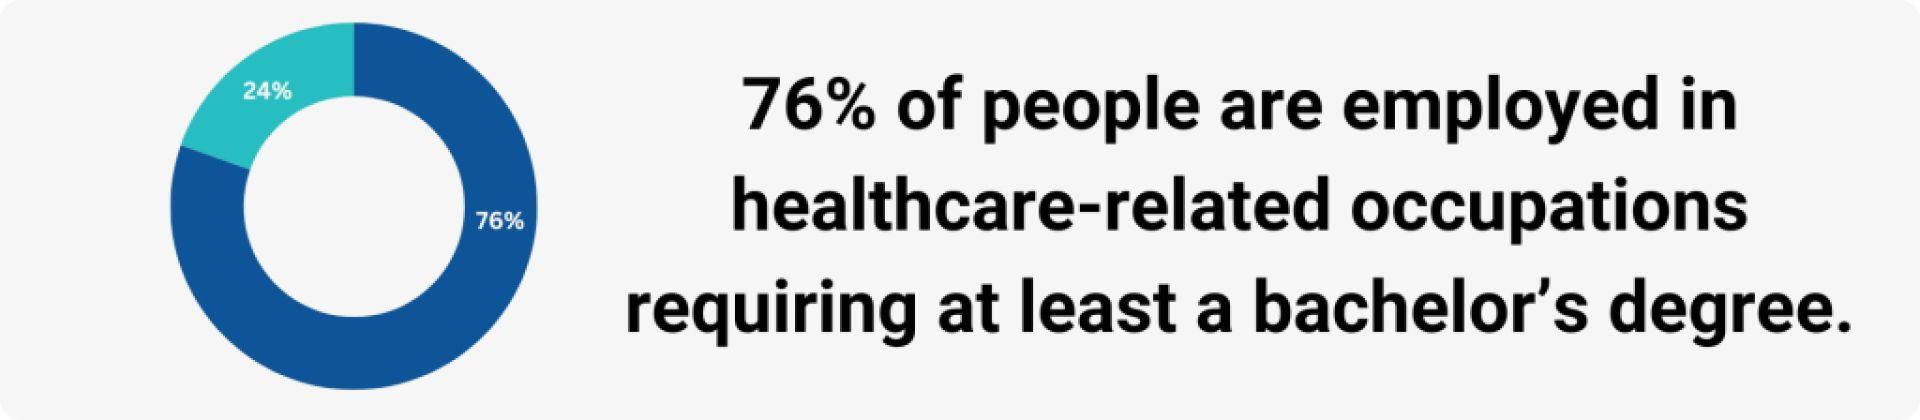 76% of people are employed in healthcare-related occupations requiring at least a bachelor’s degree.